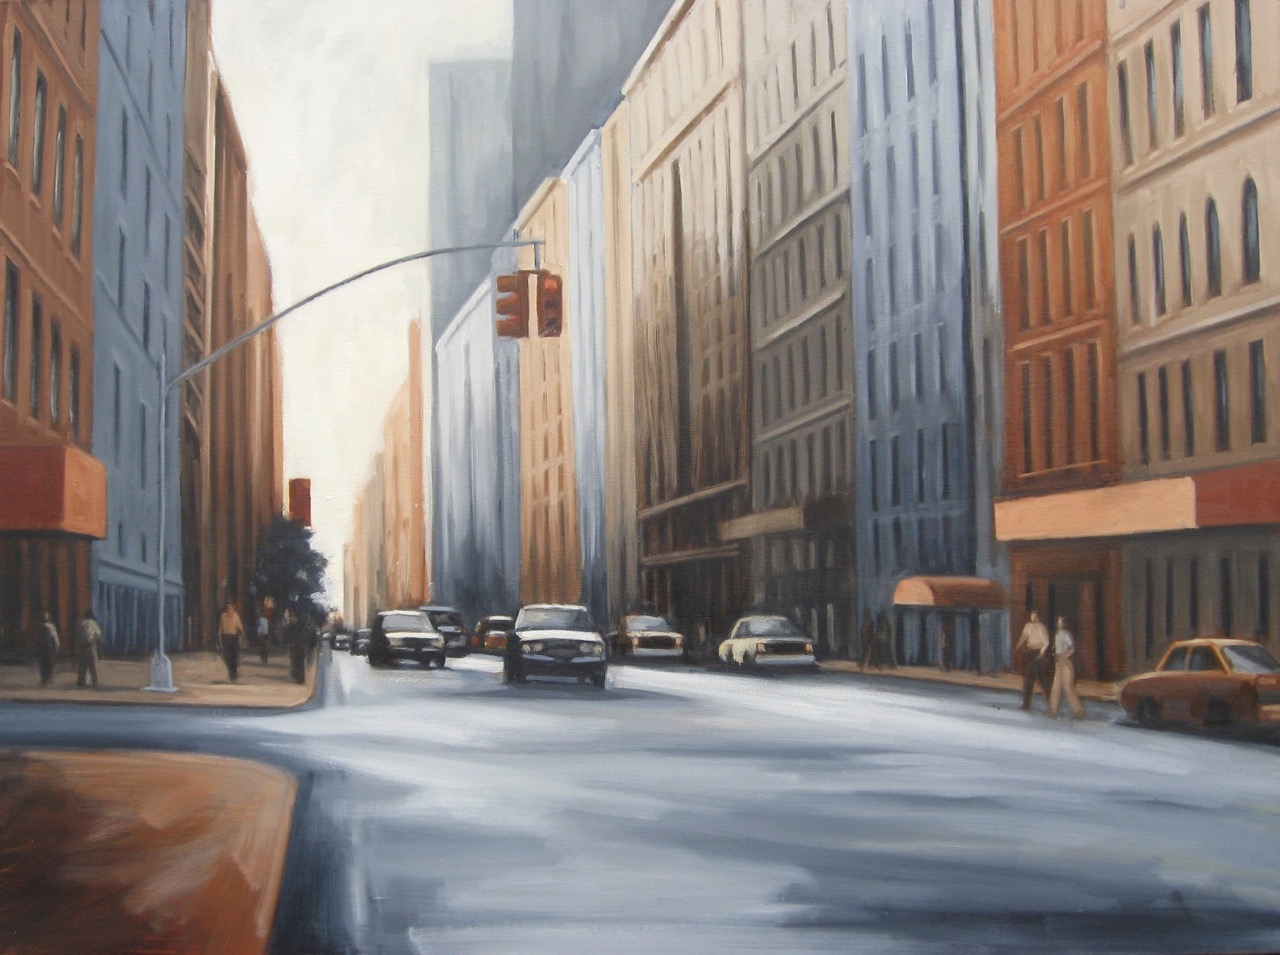 Katherine Weiss, "Crosstown Street", oil on canvas, 30 x 40 inches